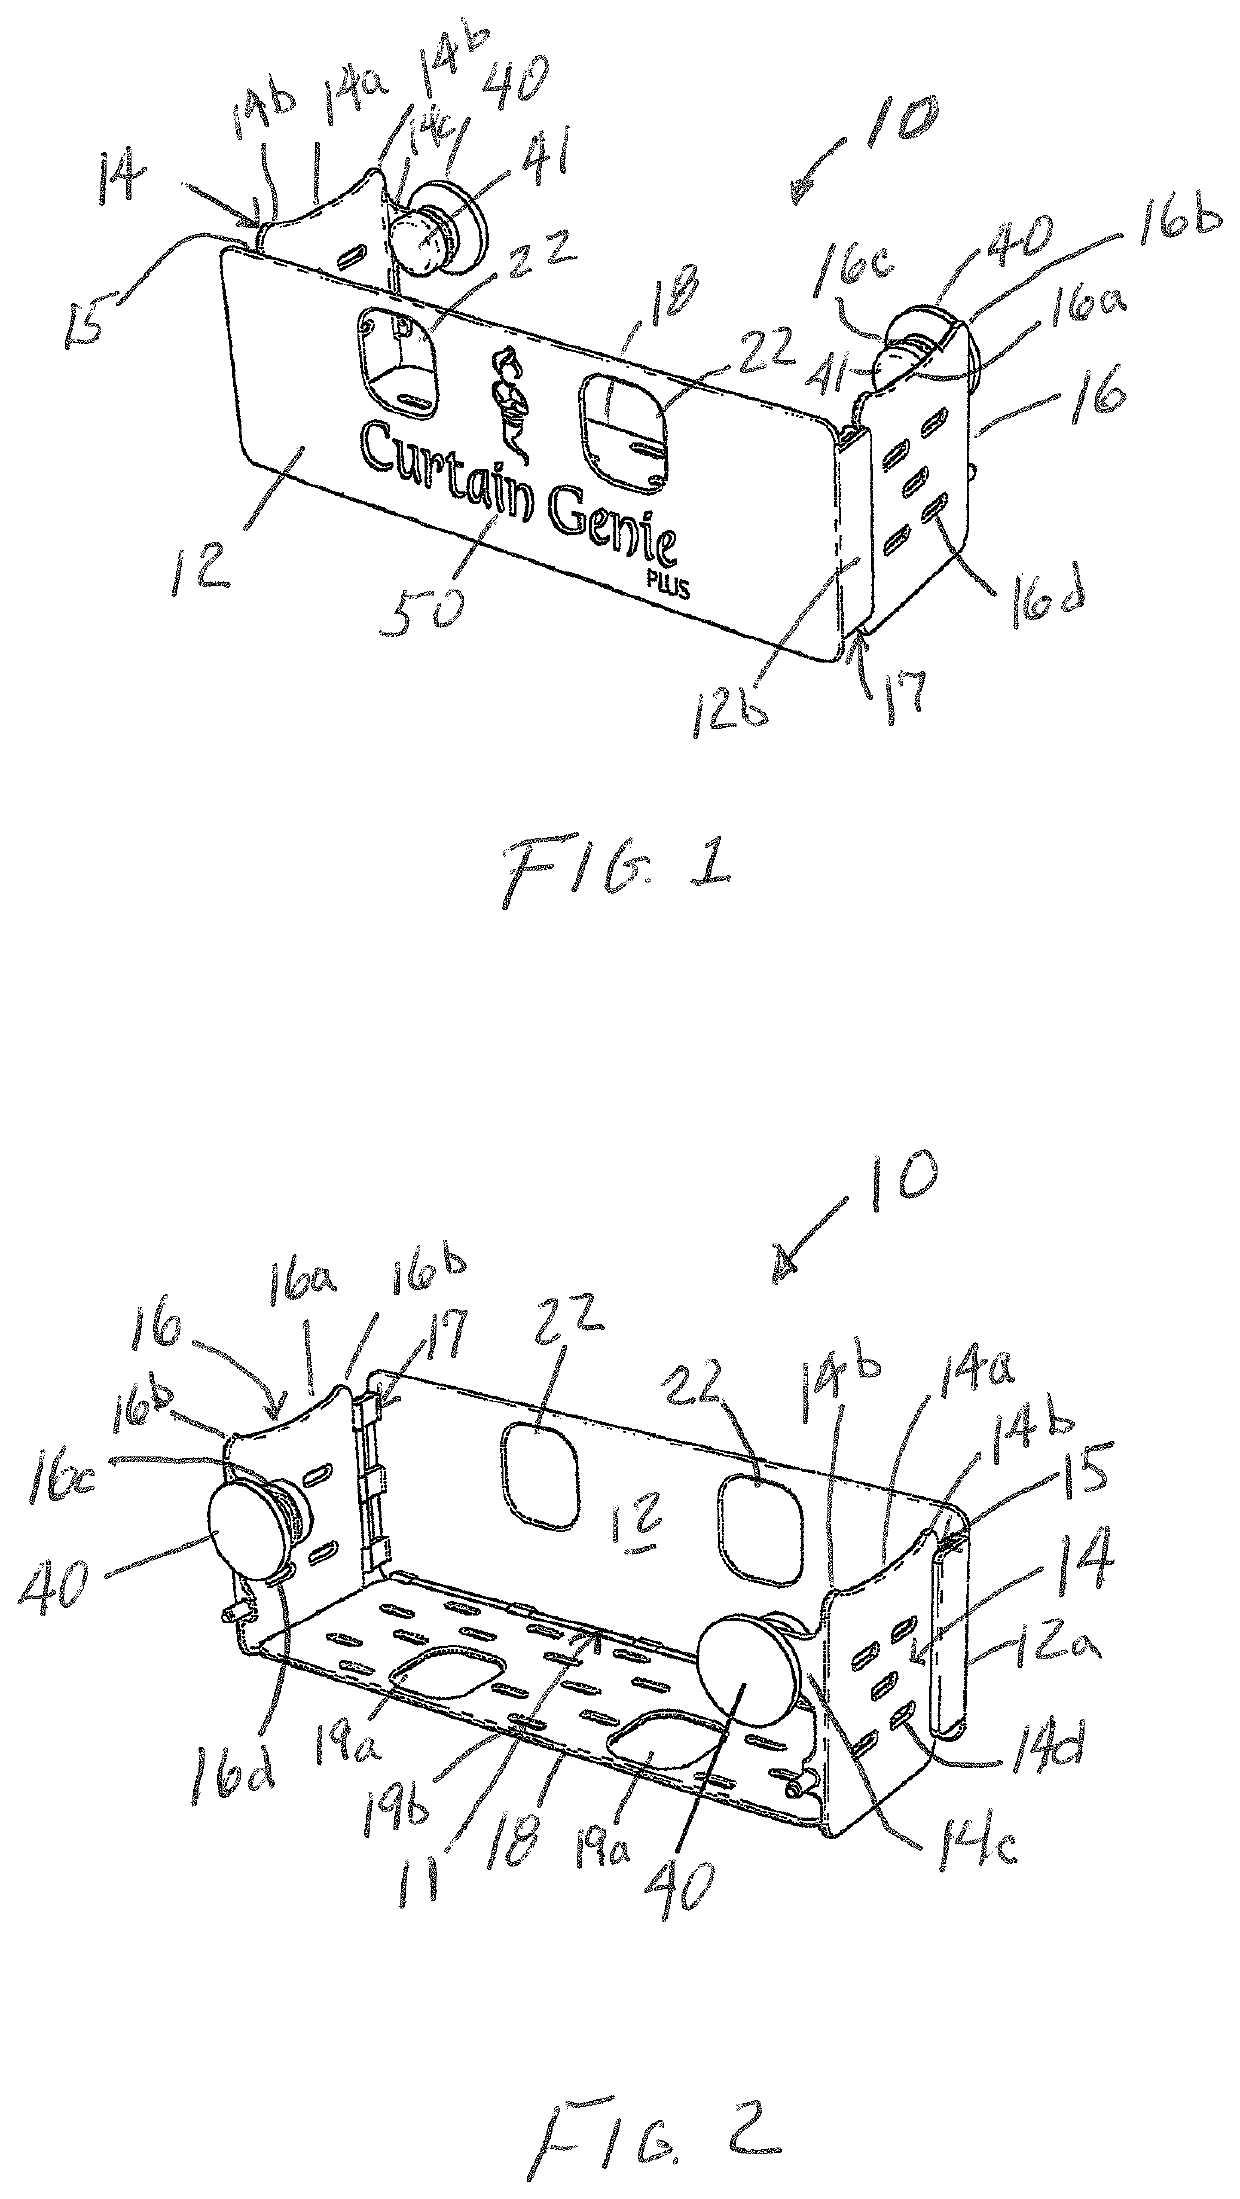 Portable and foldable shelf and window dressing support device